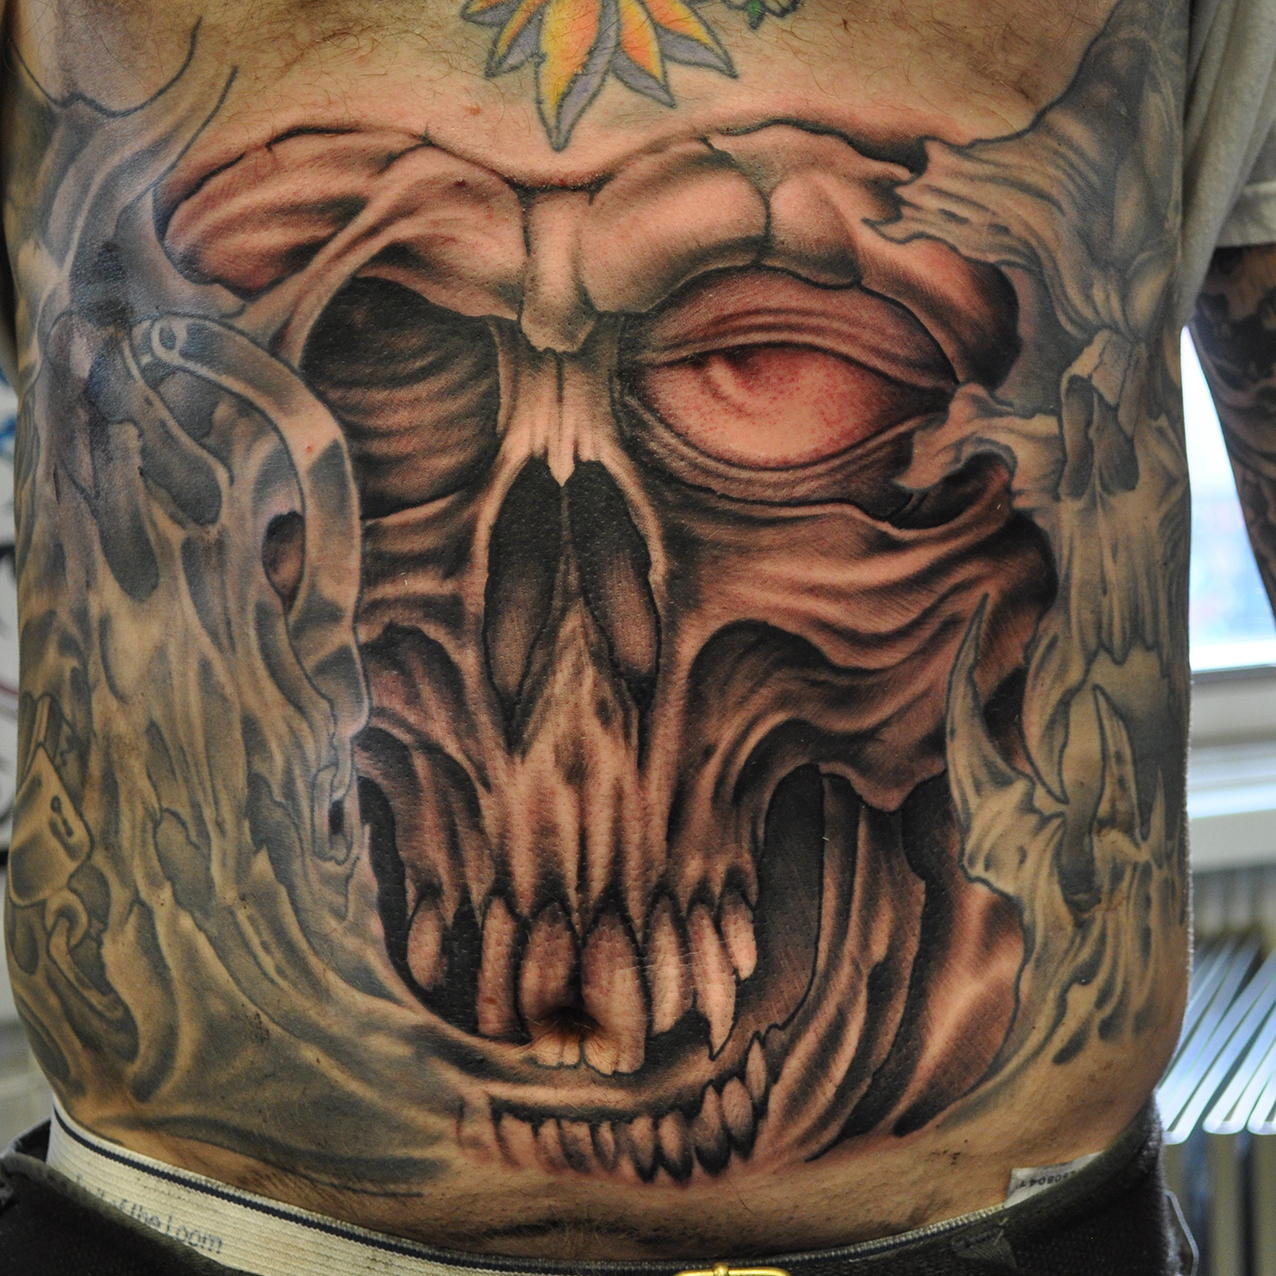 Big Skull on a Belly by Brian Ulrich  Living Arts Tattoo New Hope Pa